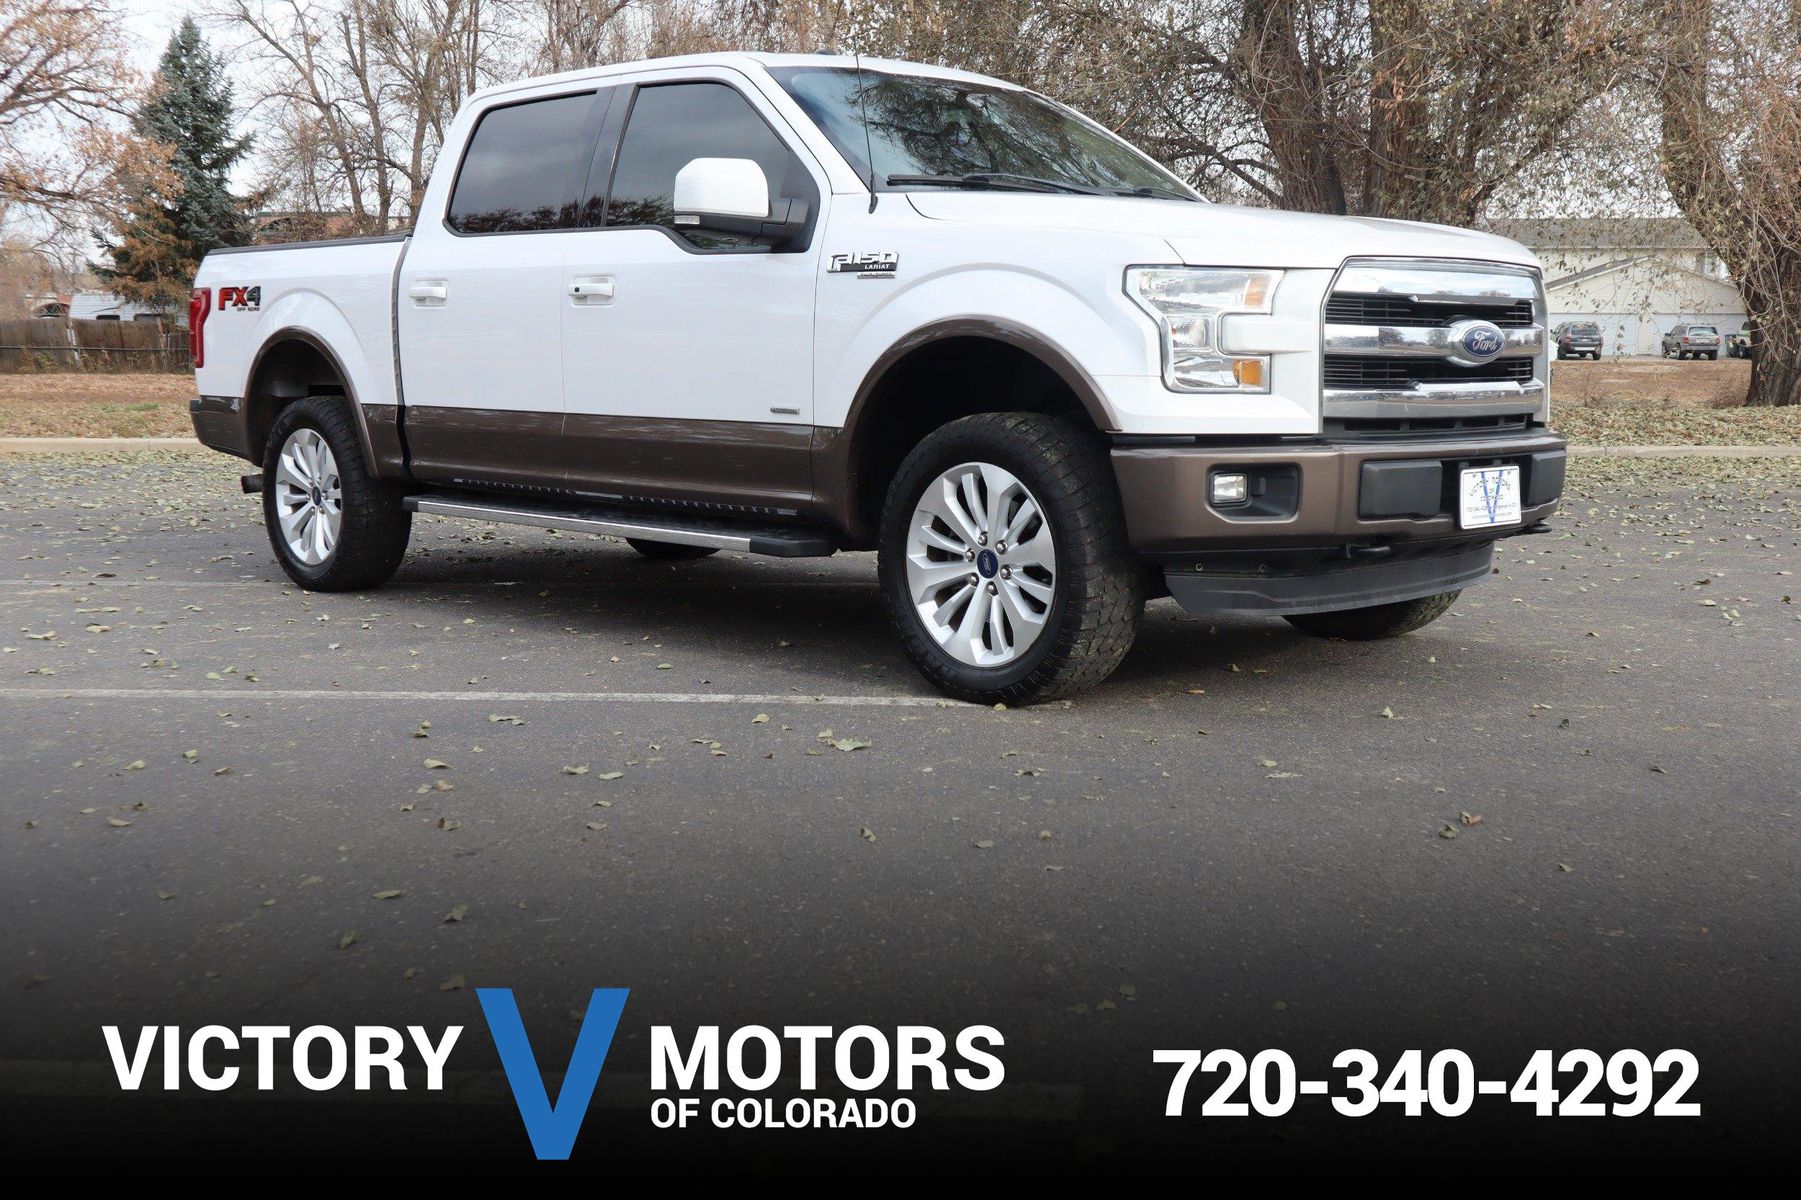 2015 Ford F-150 Lariat | Victory Motors of Colorado 2015 Ford F150 Vibration At Highway Speeds